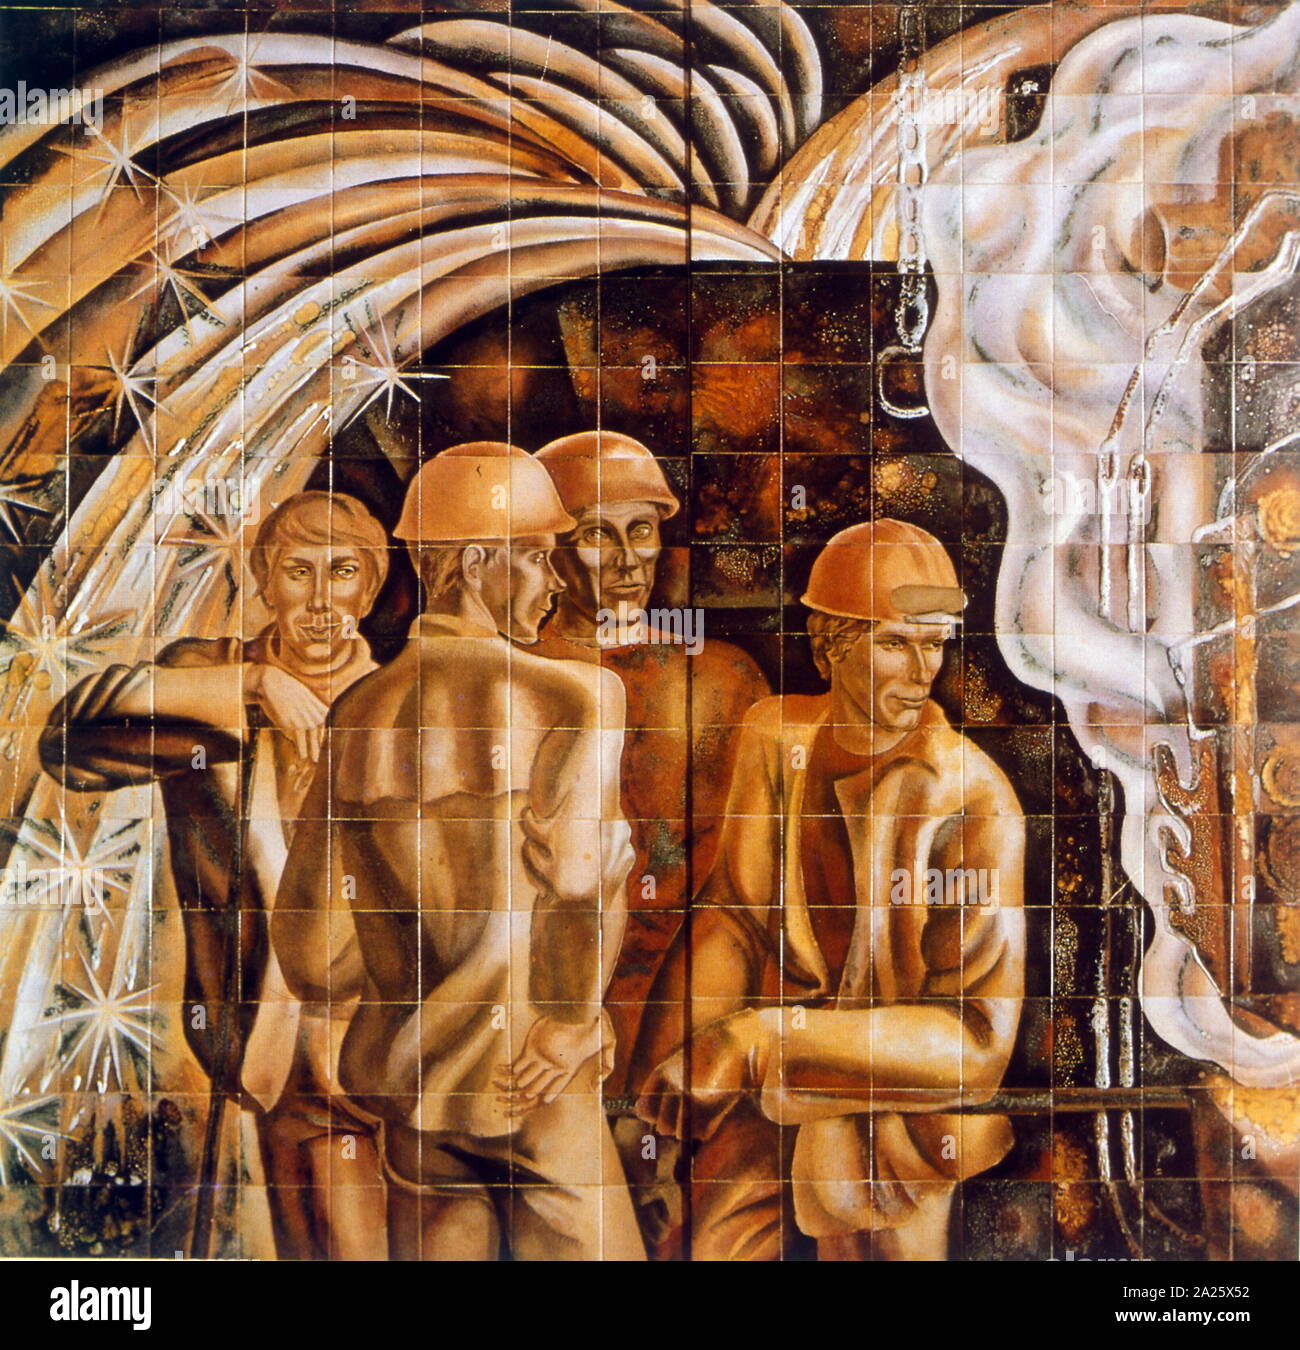 mural 'the young generation' 1977, by Alexander Alyokhina (20th century Russian artist. Depicts group of Soviet industrial workers Stock Photo